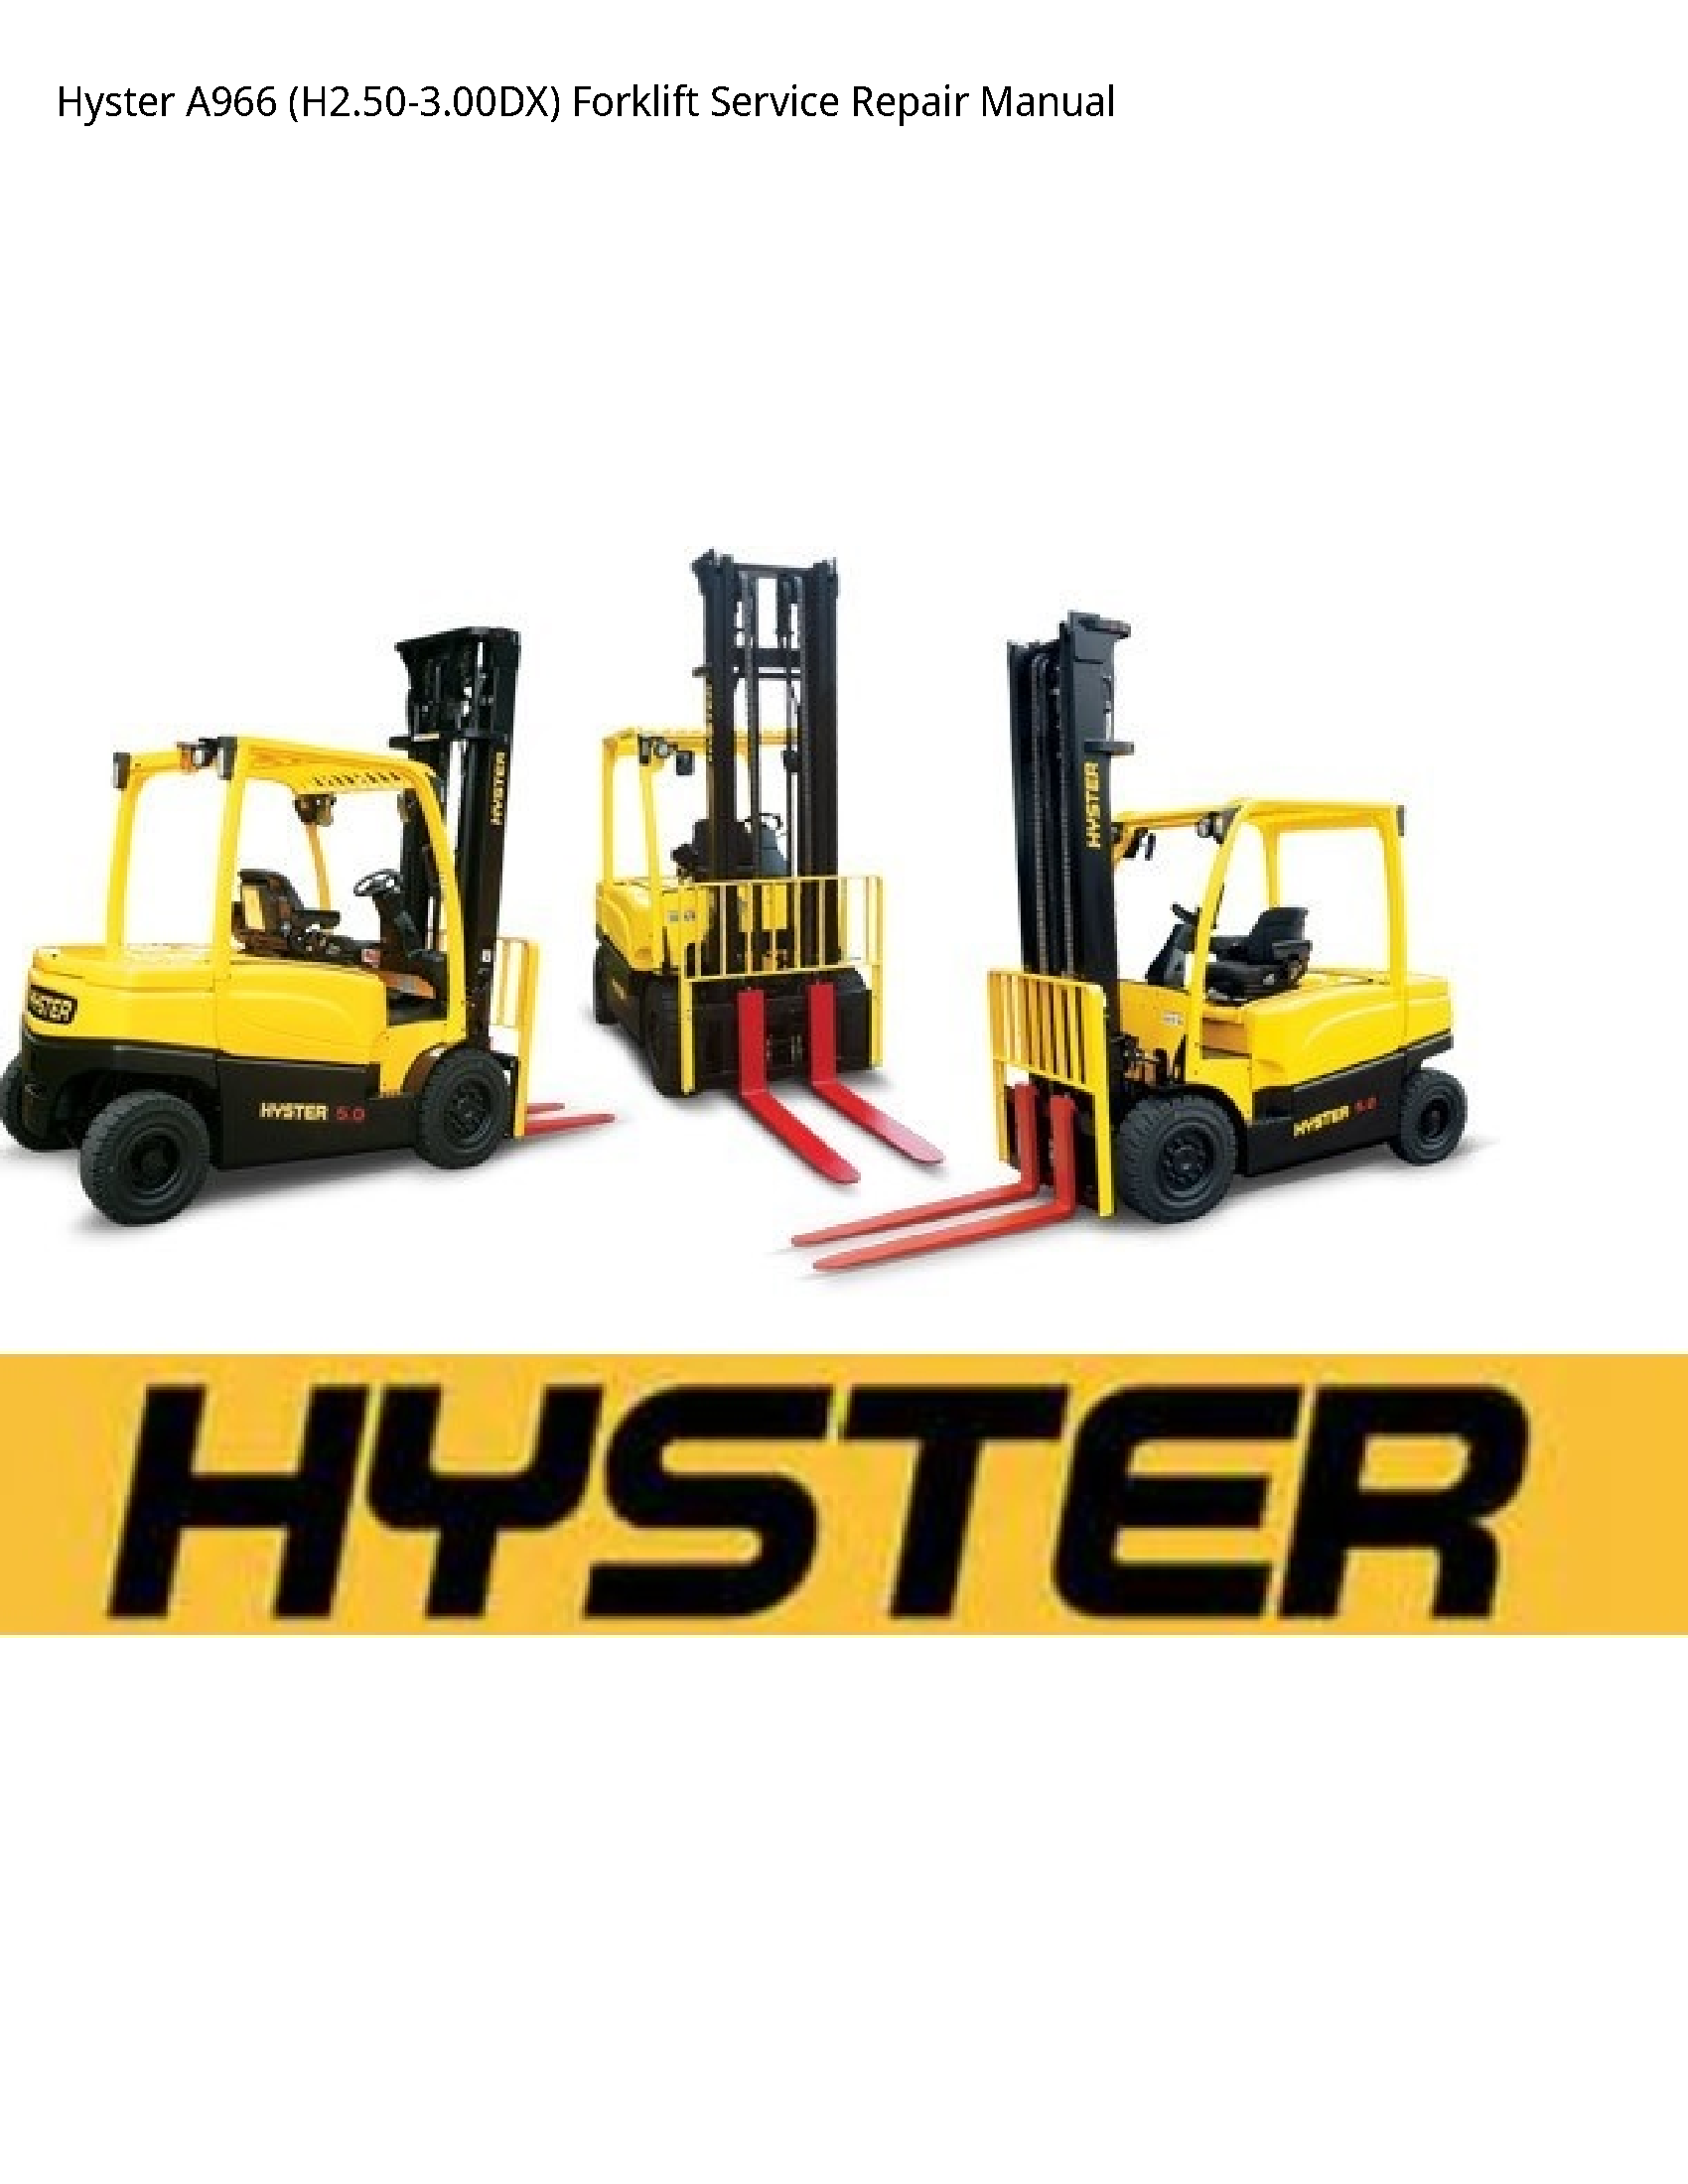 Hyster A966 Forklift manual